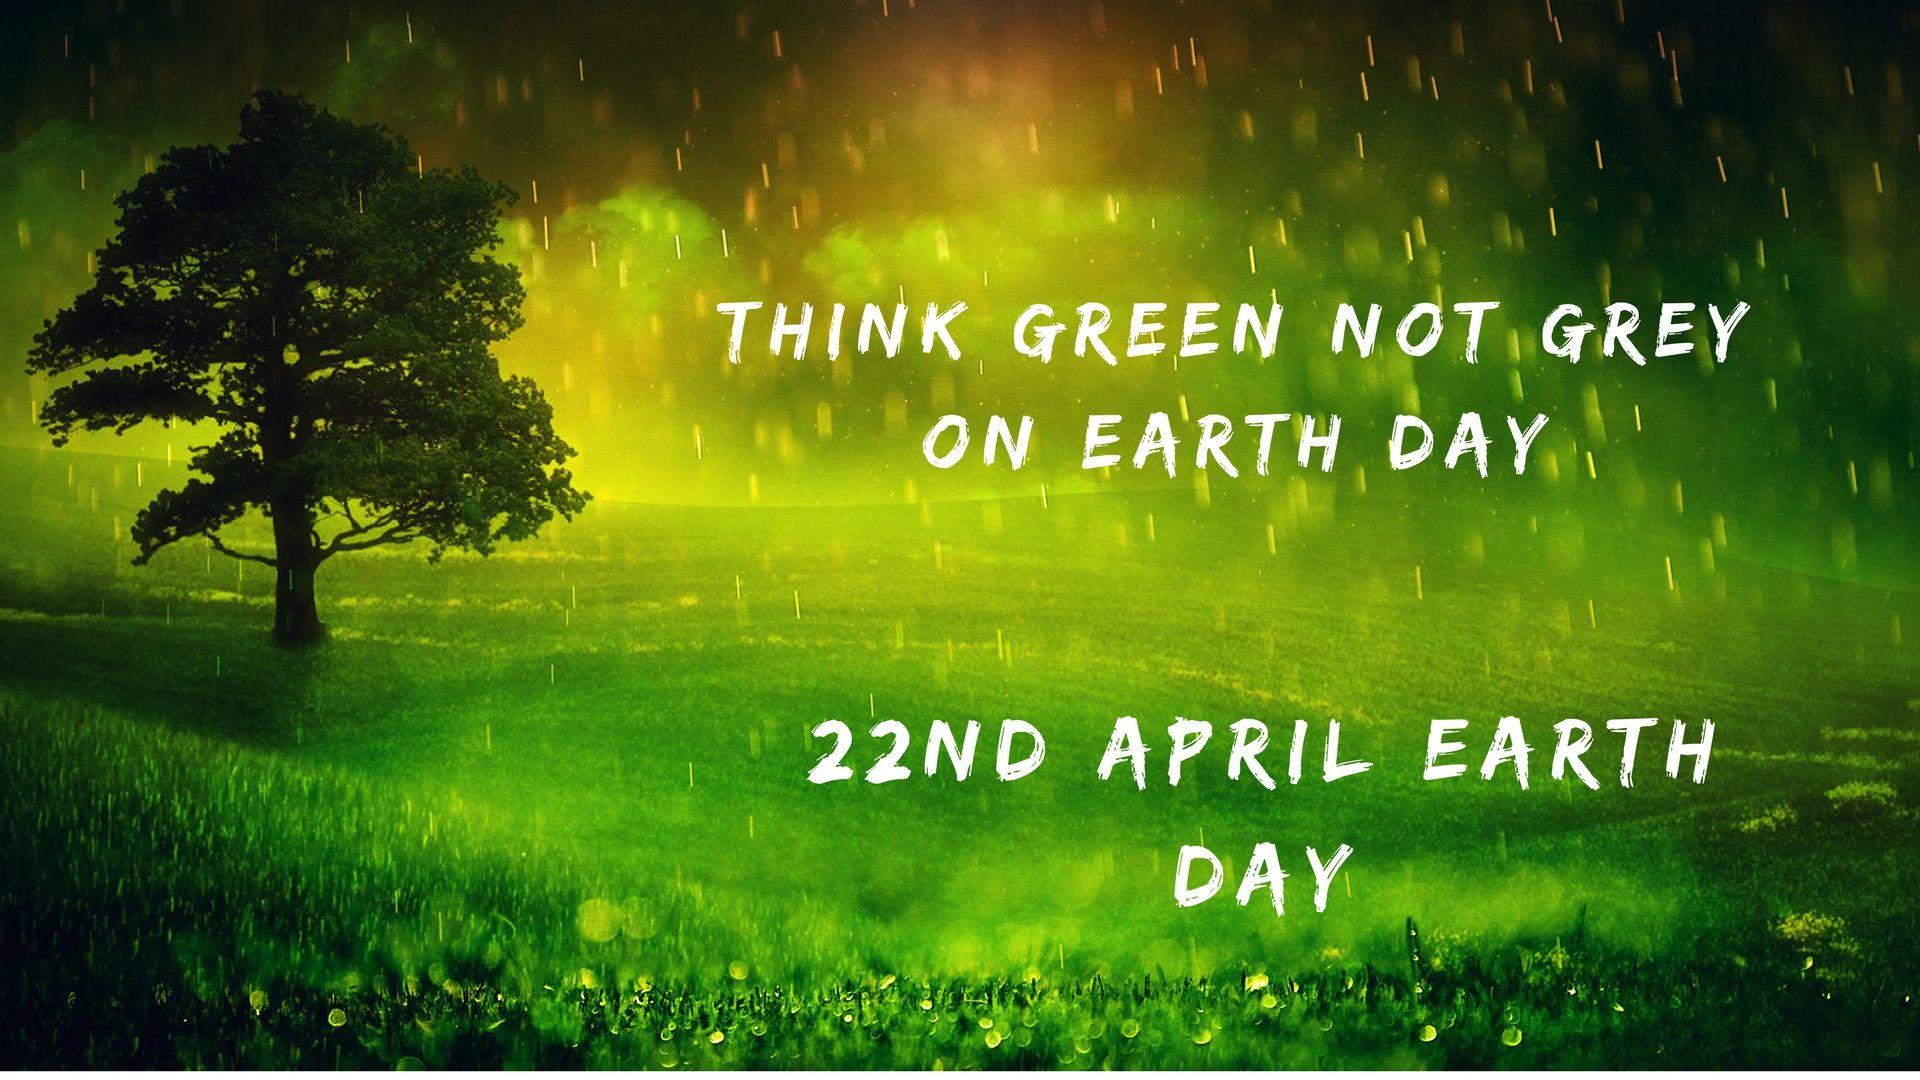 Earth Day Slogan Picture Image HD Wallpaper Download